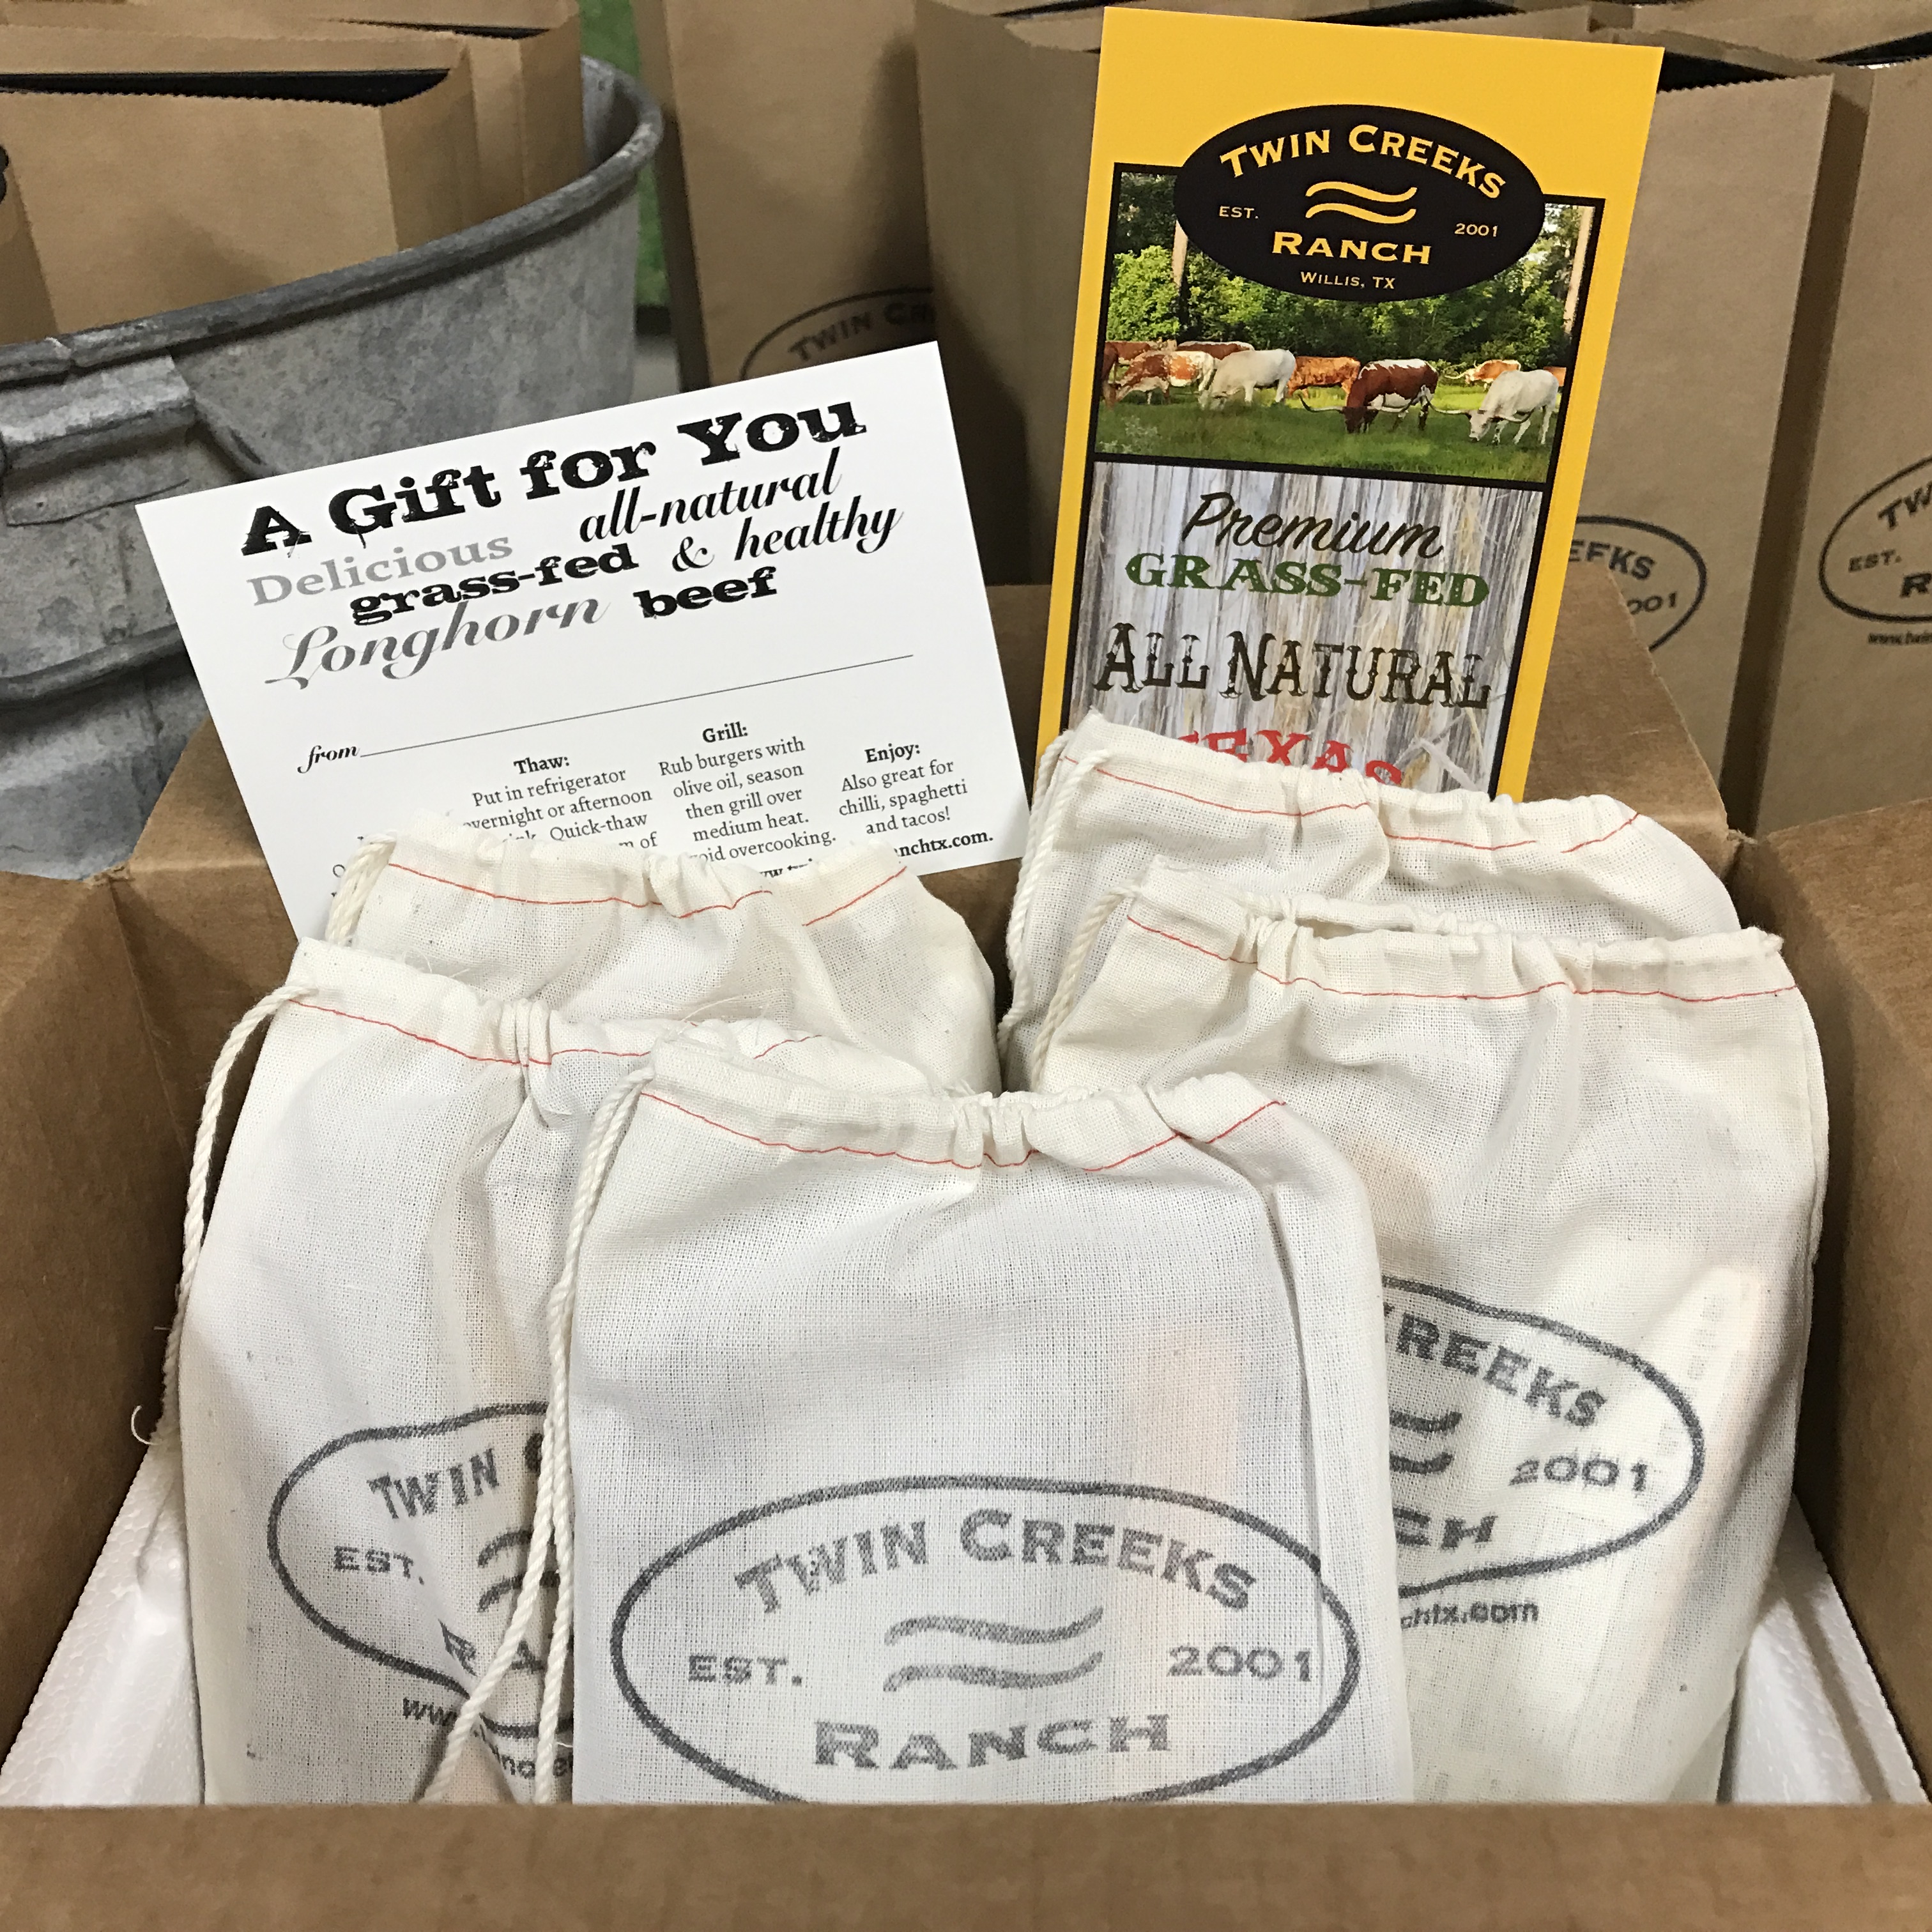 Twin Creeks Ranch Grass-fed Beef available in Gift Boxes.